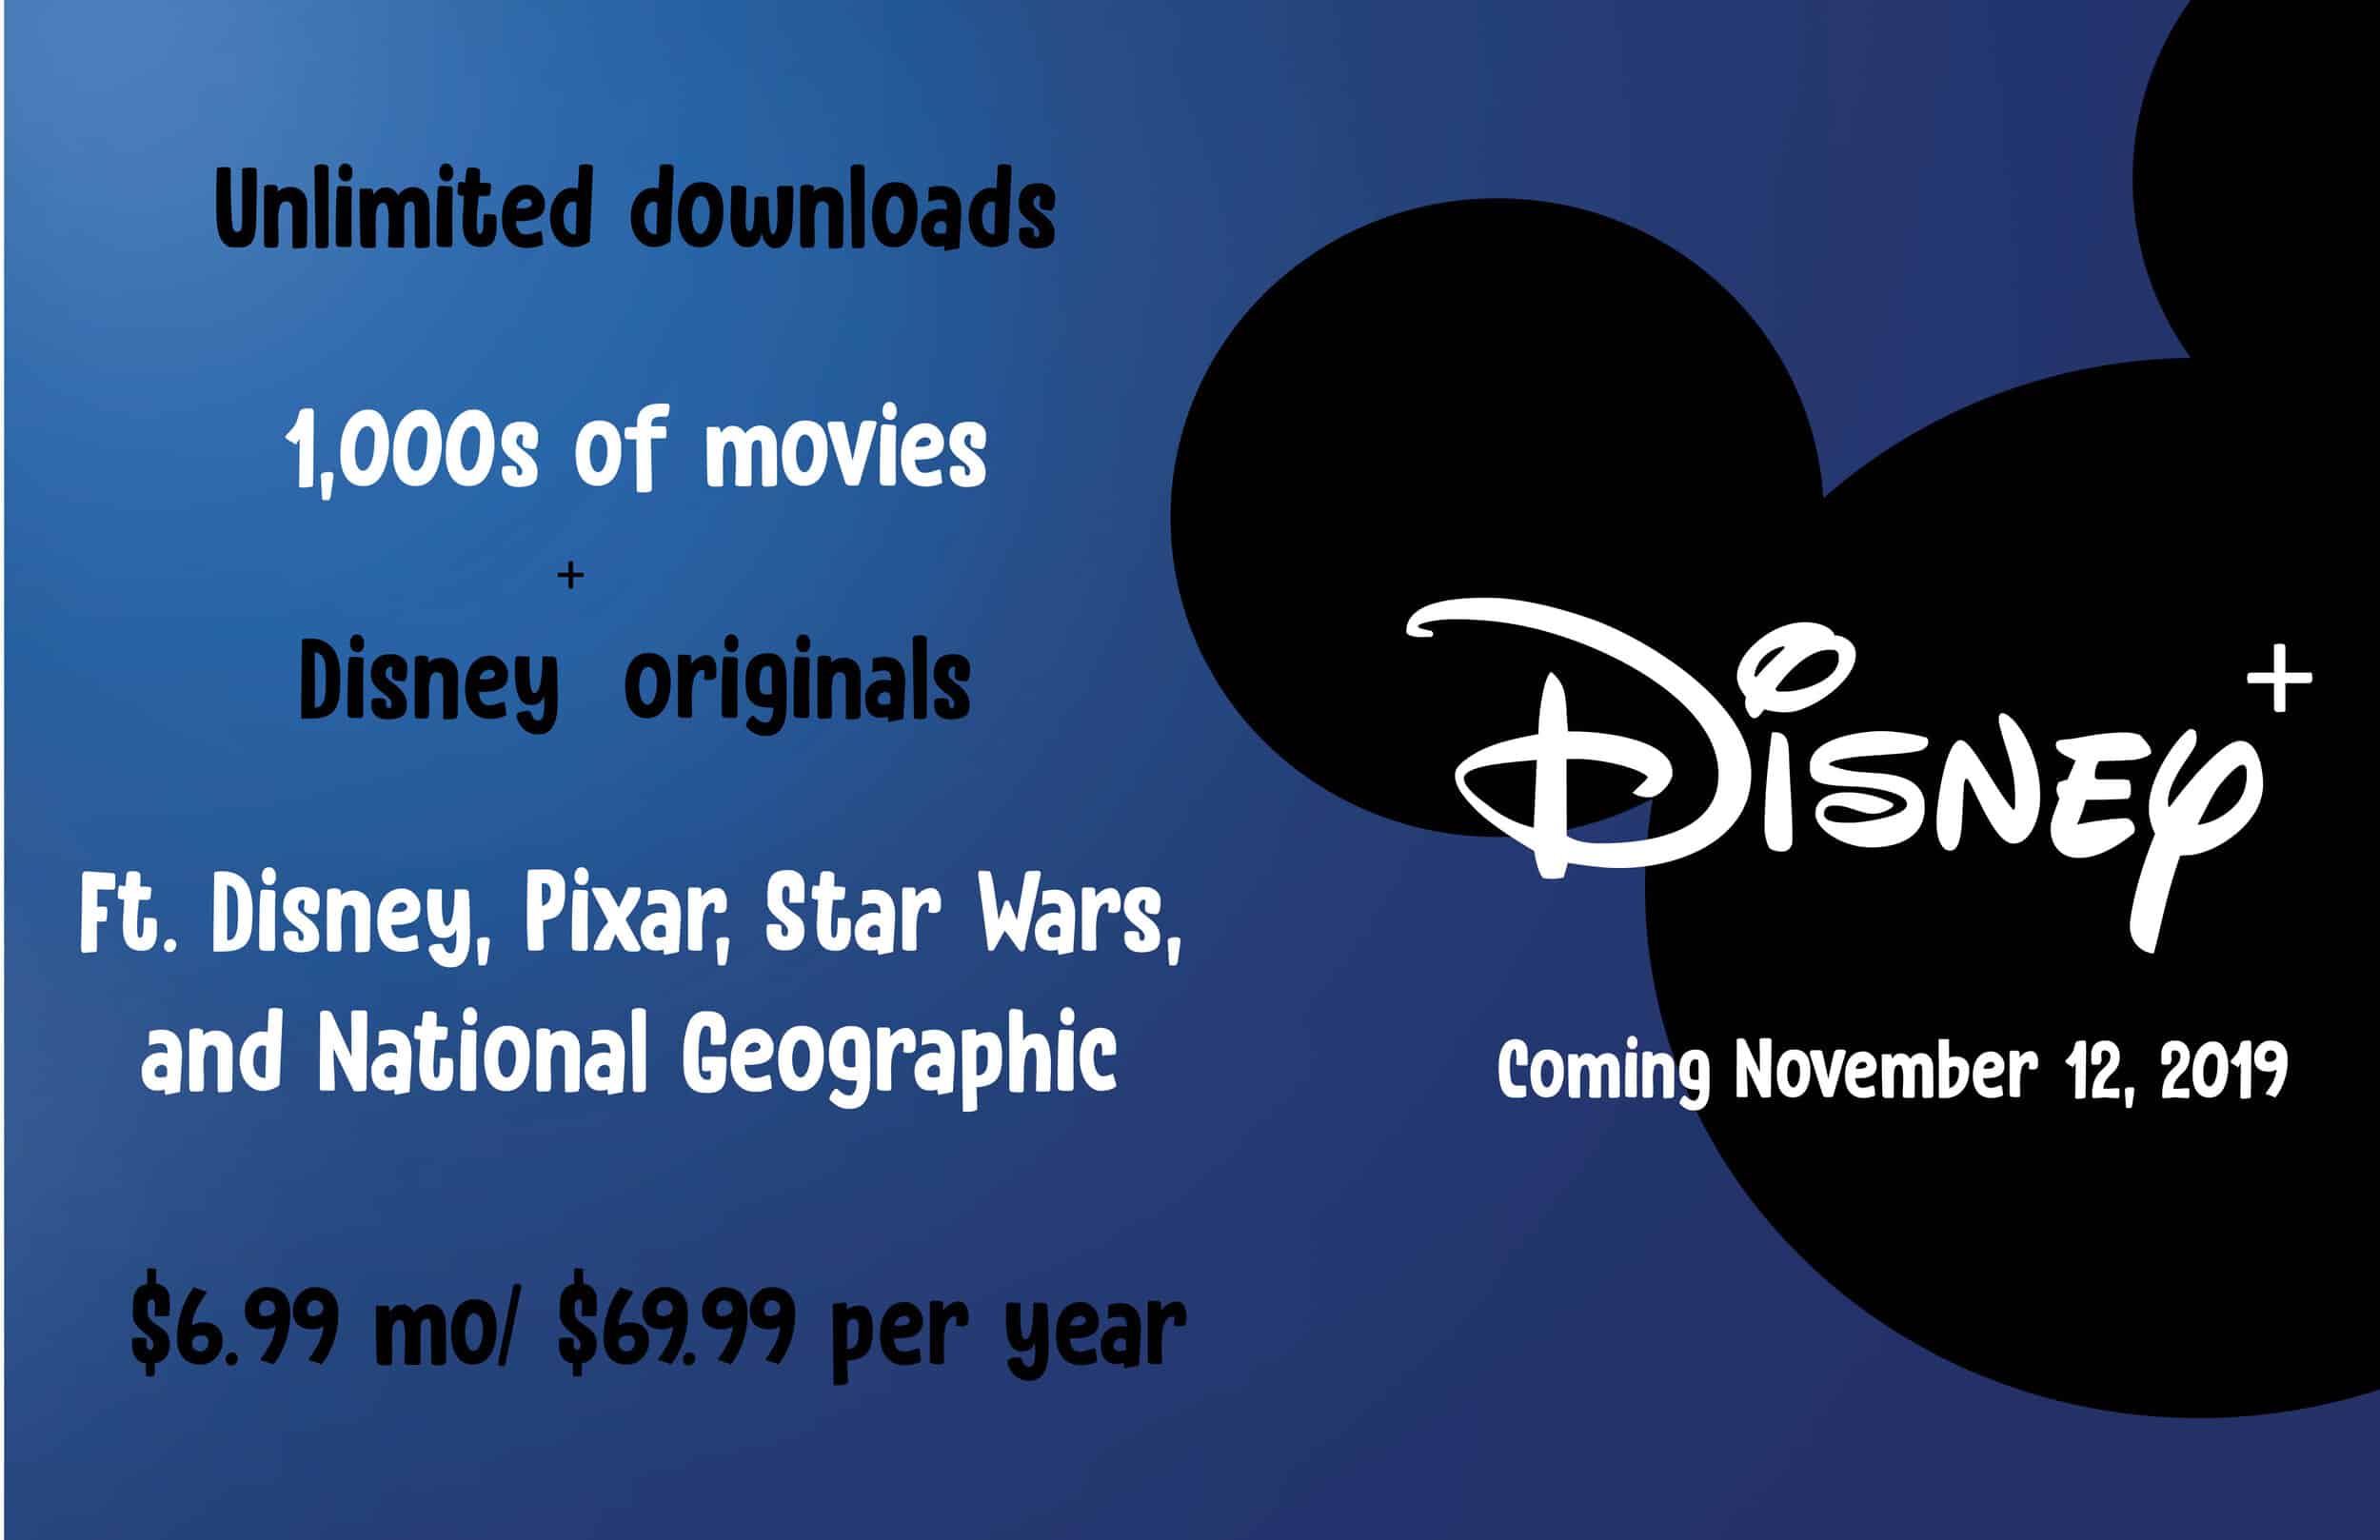 Disney Plus is the new upcoming streaming service officially launching in November of 2019. The service will include shows from Disney, Pixar, and National Geographic.